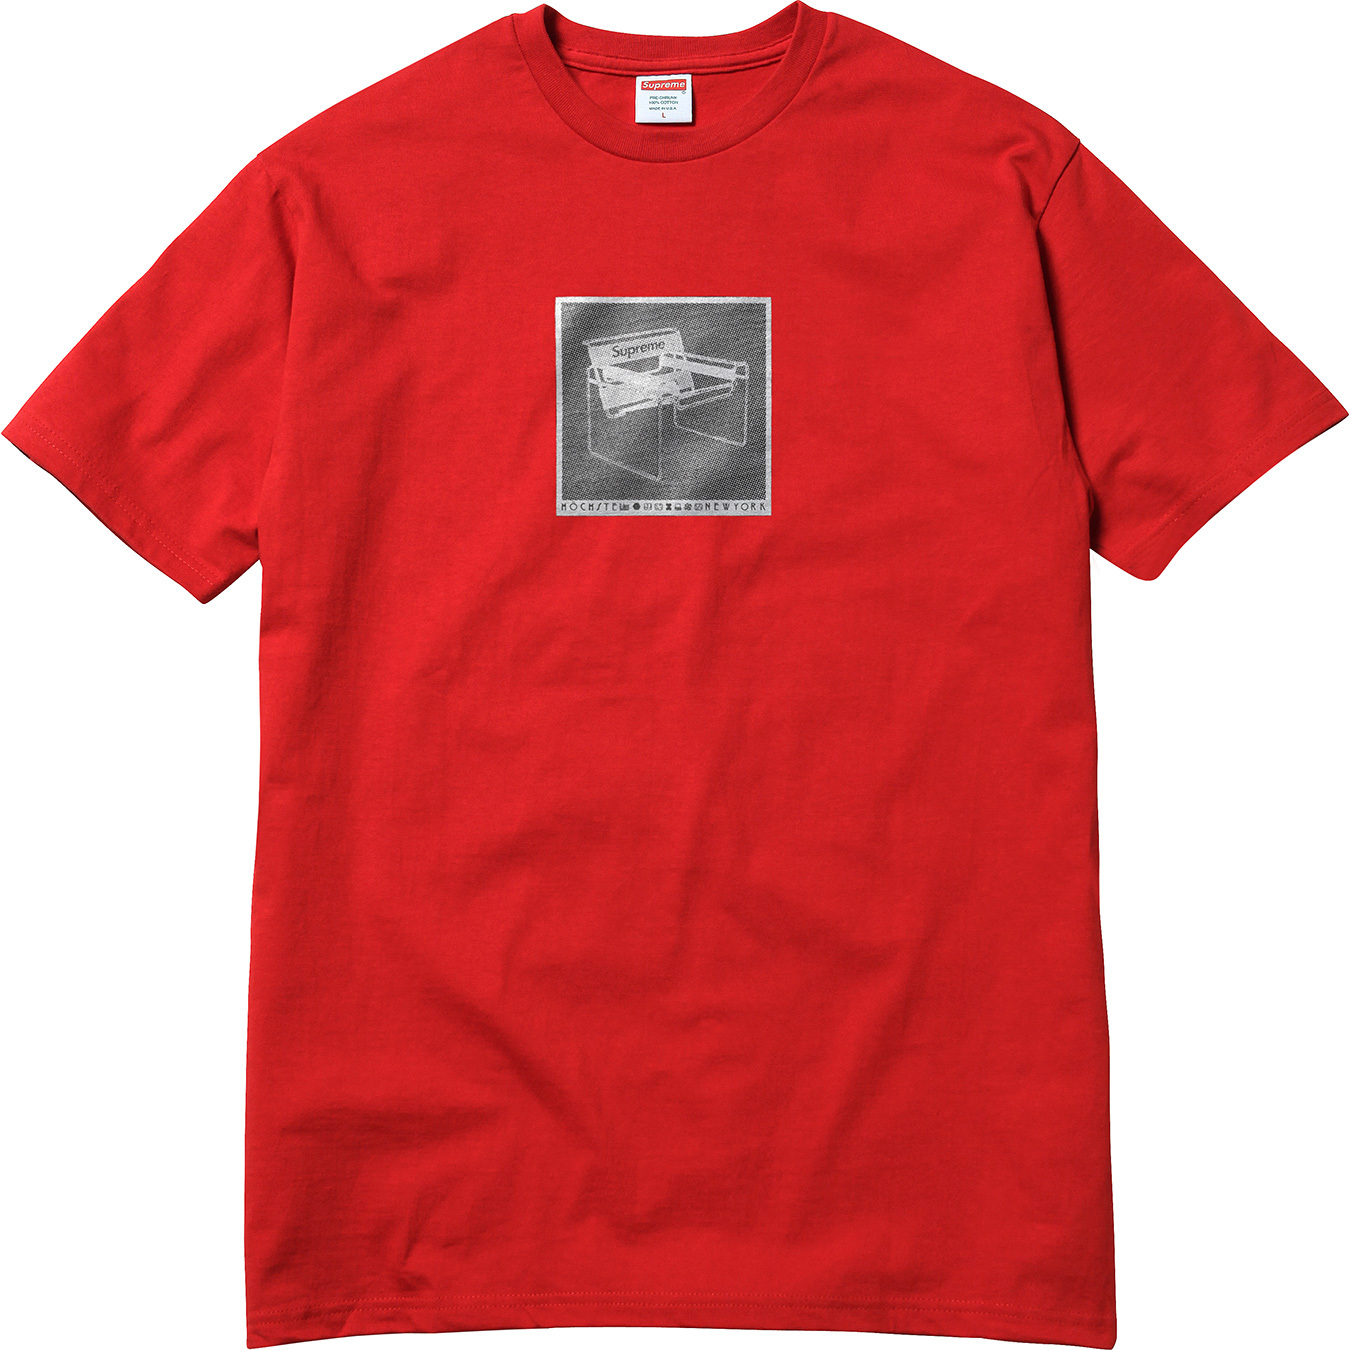 Chair Tee - spring summer 2018 - Supreme